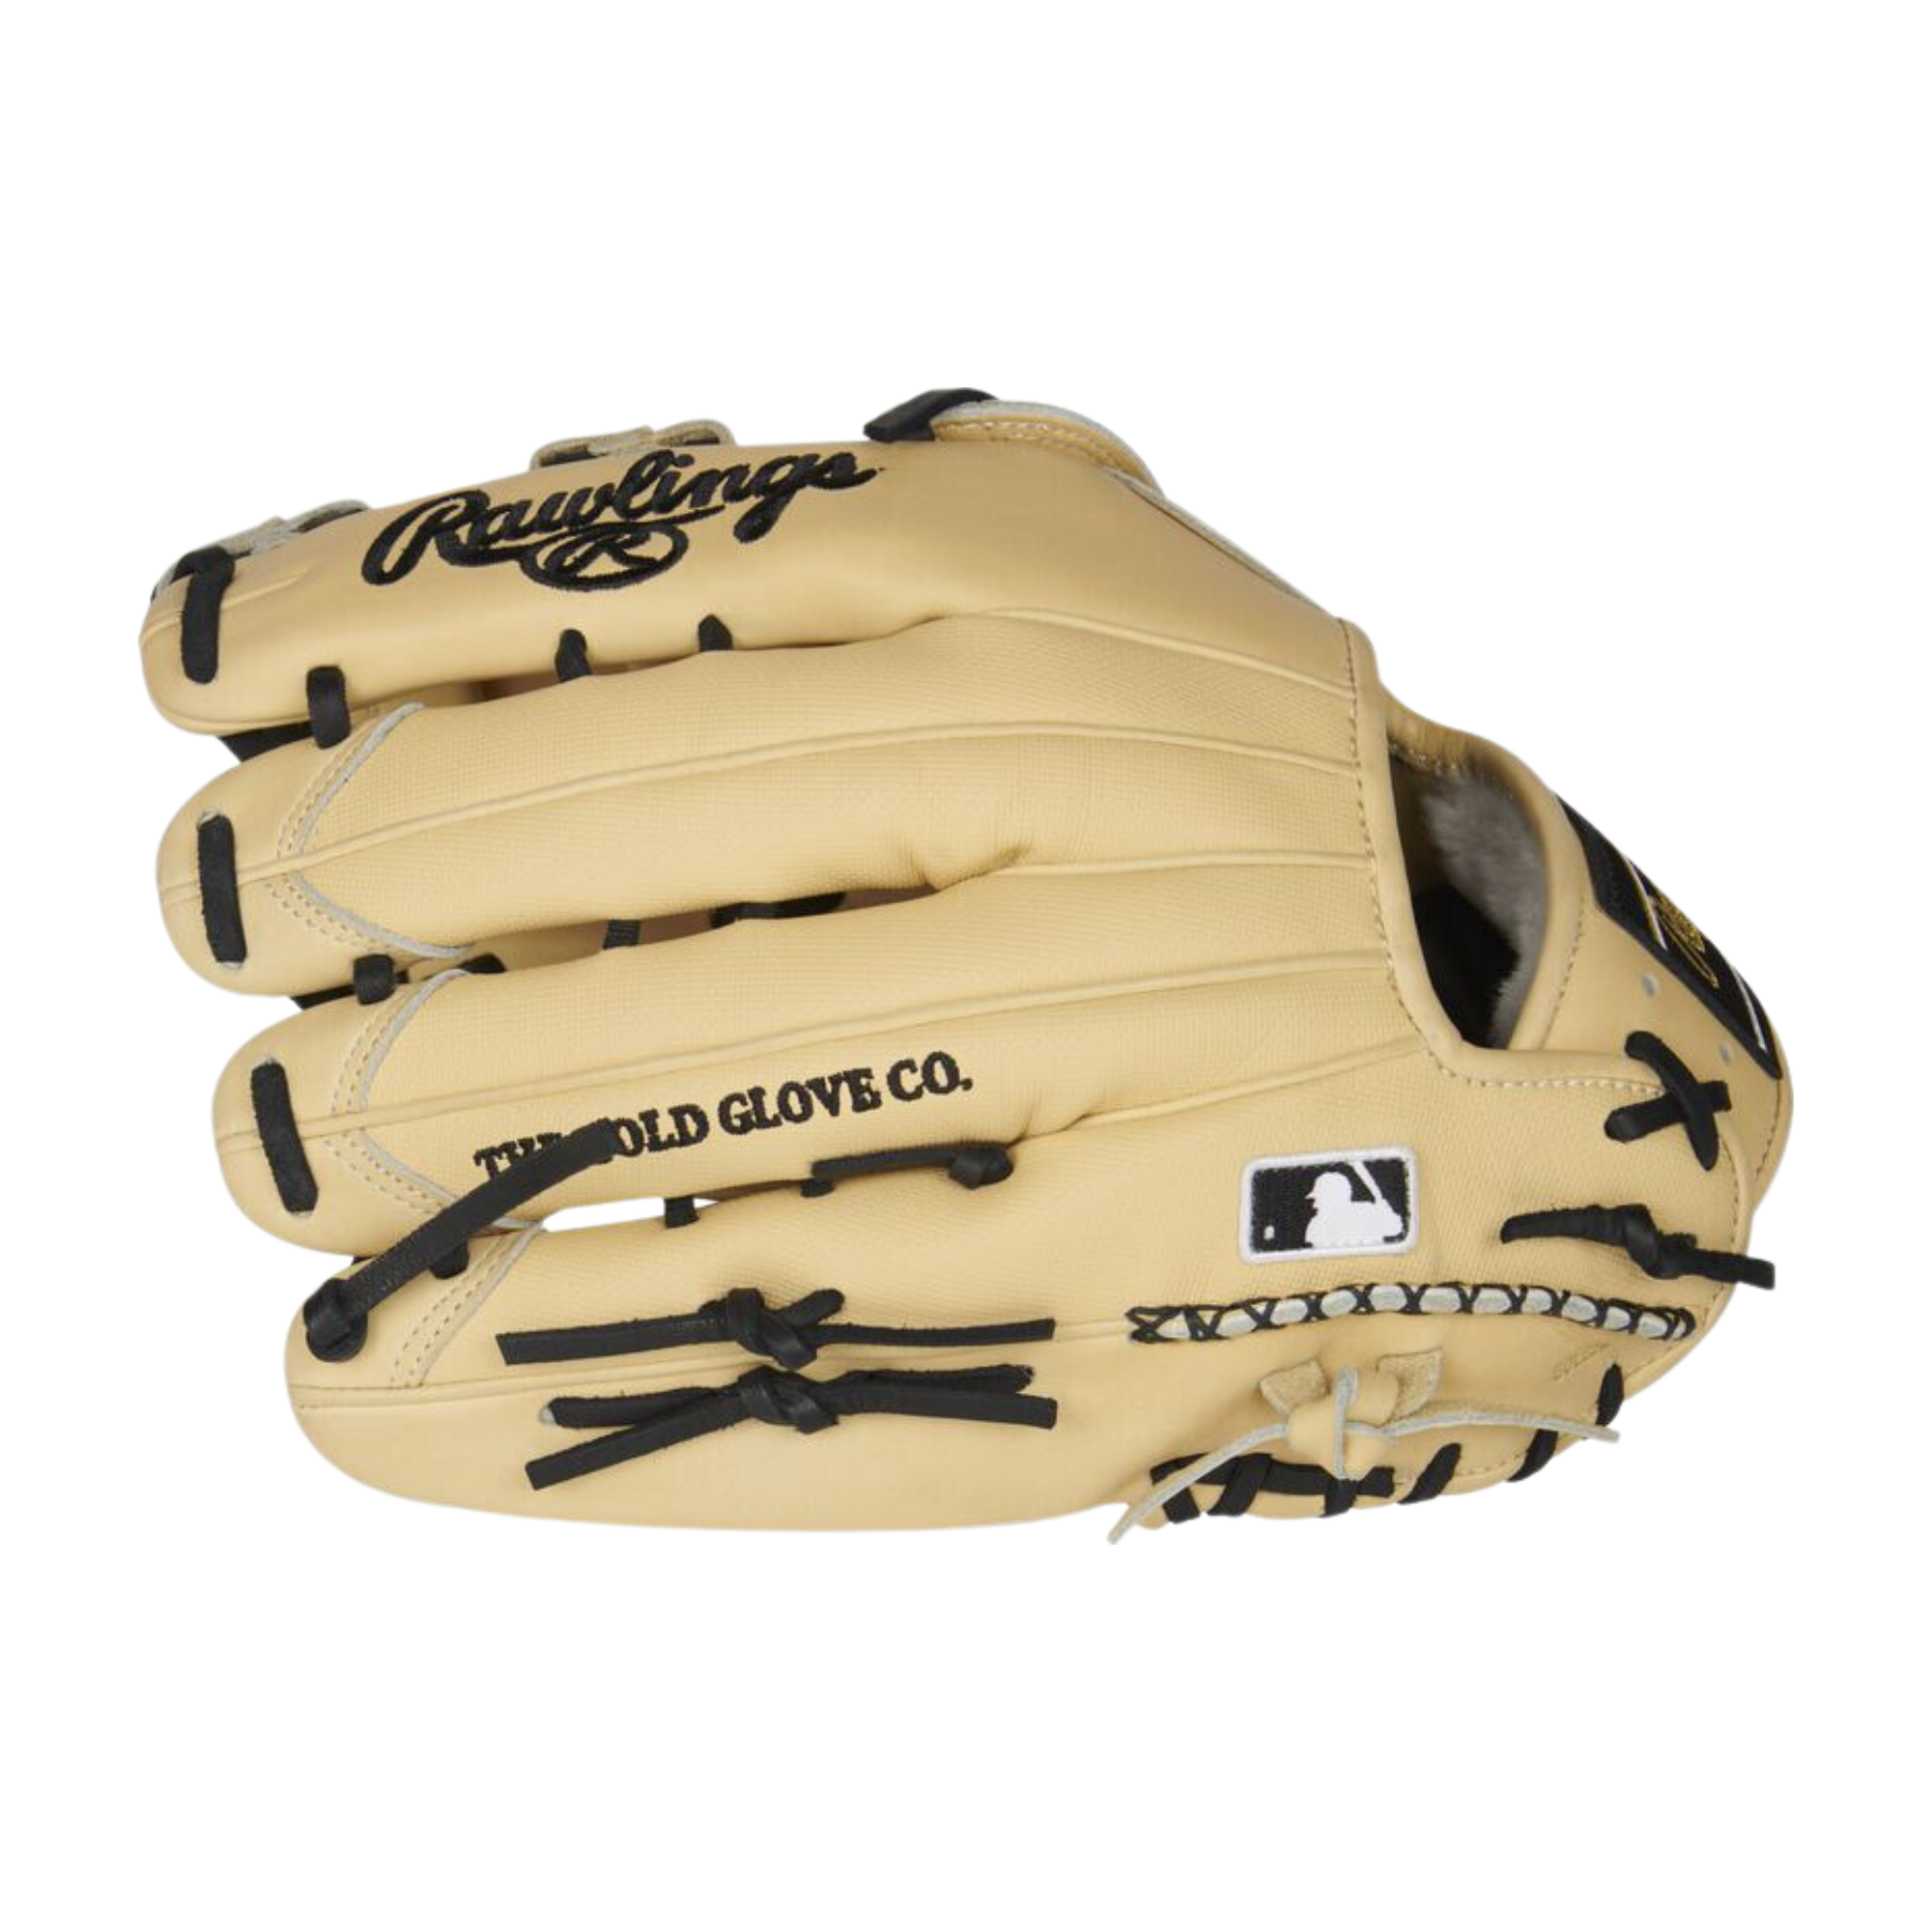 Rawlings Pro Preferred OF CONV/PROH LHT 12.75"